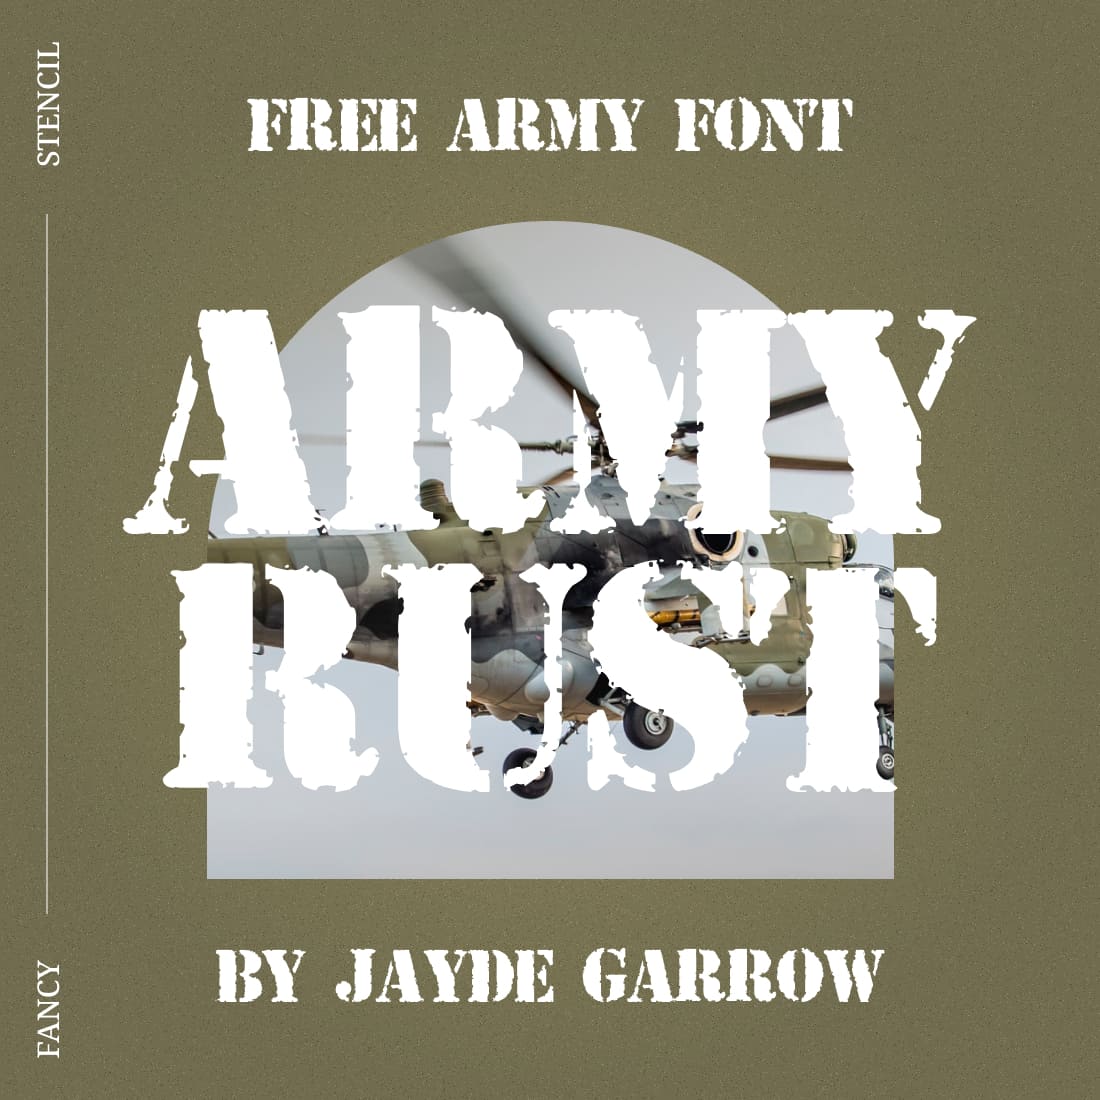 Military font in modern style.